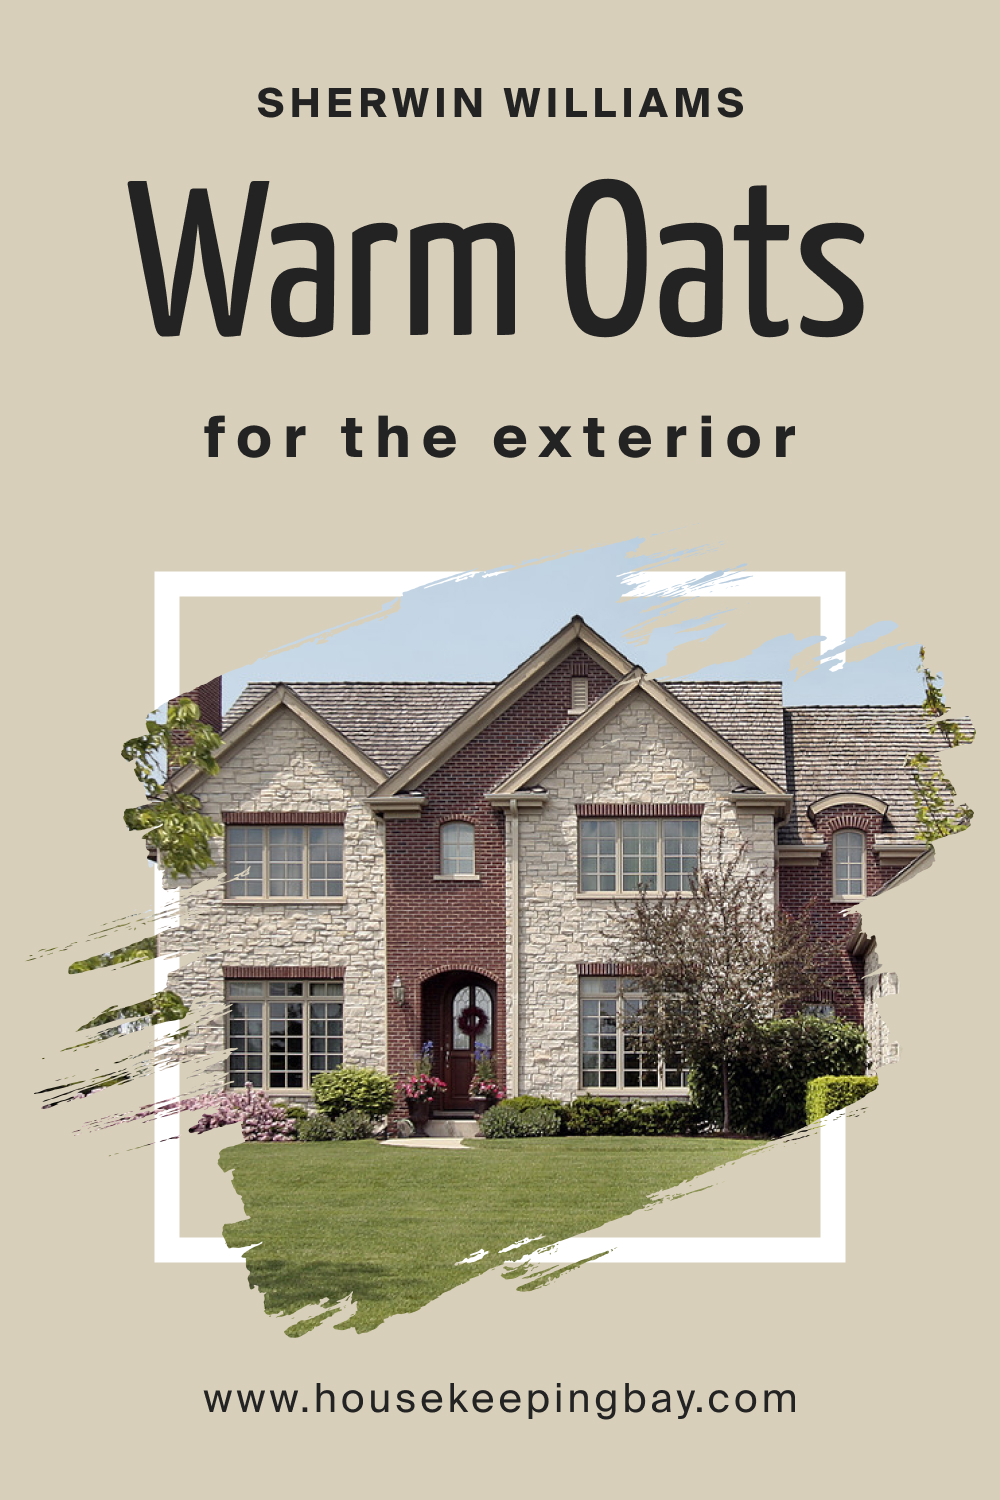 Sherwin Williams. SW 9511 Warm Oats For the exterior